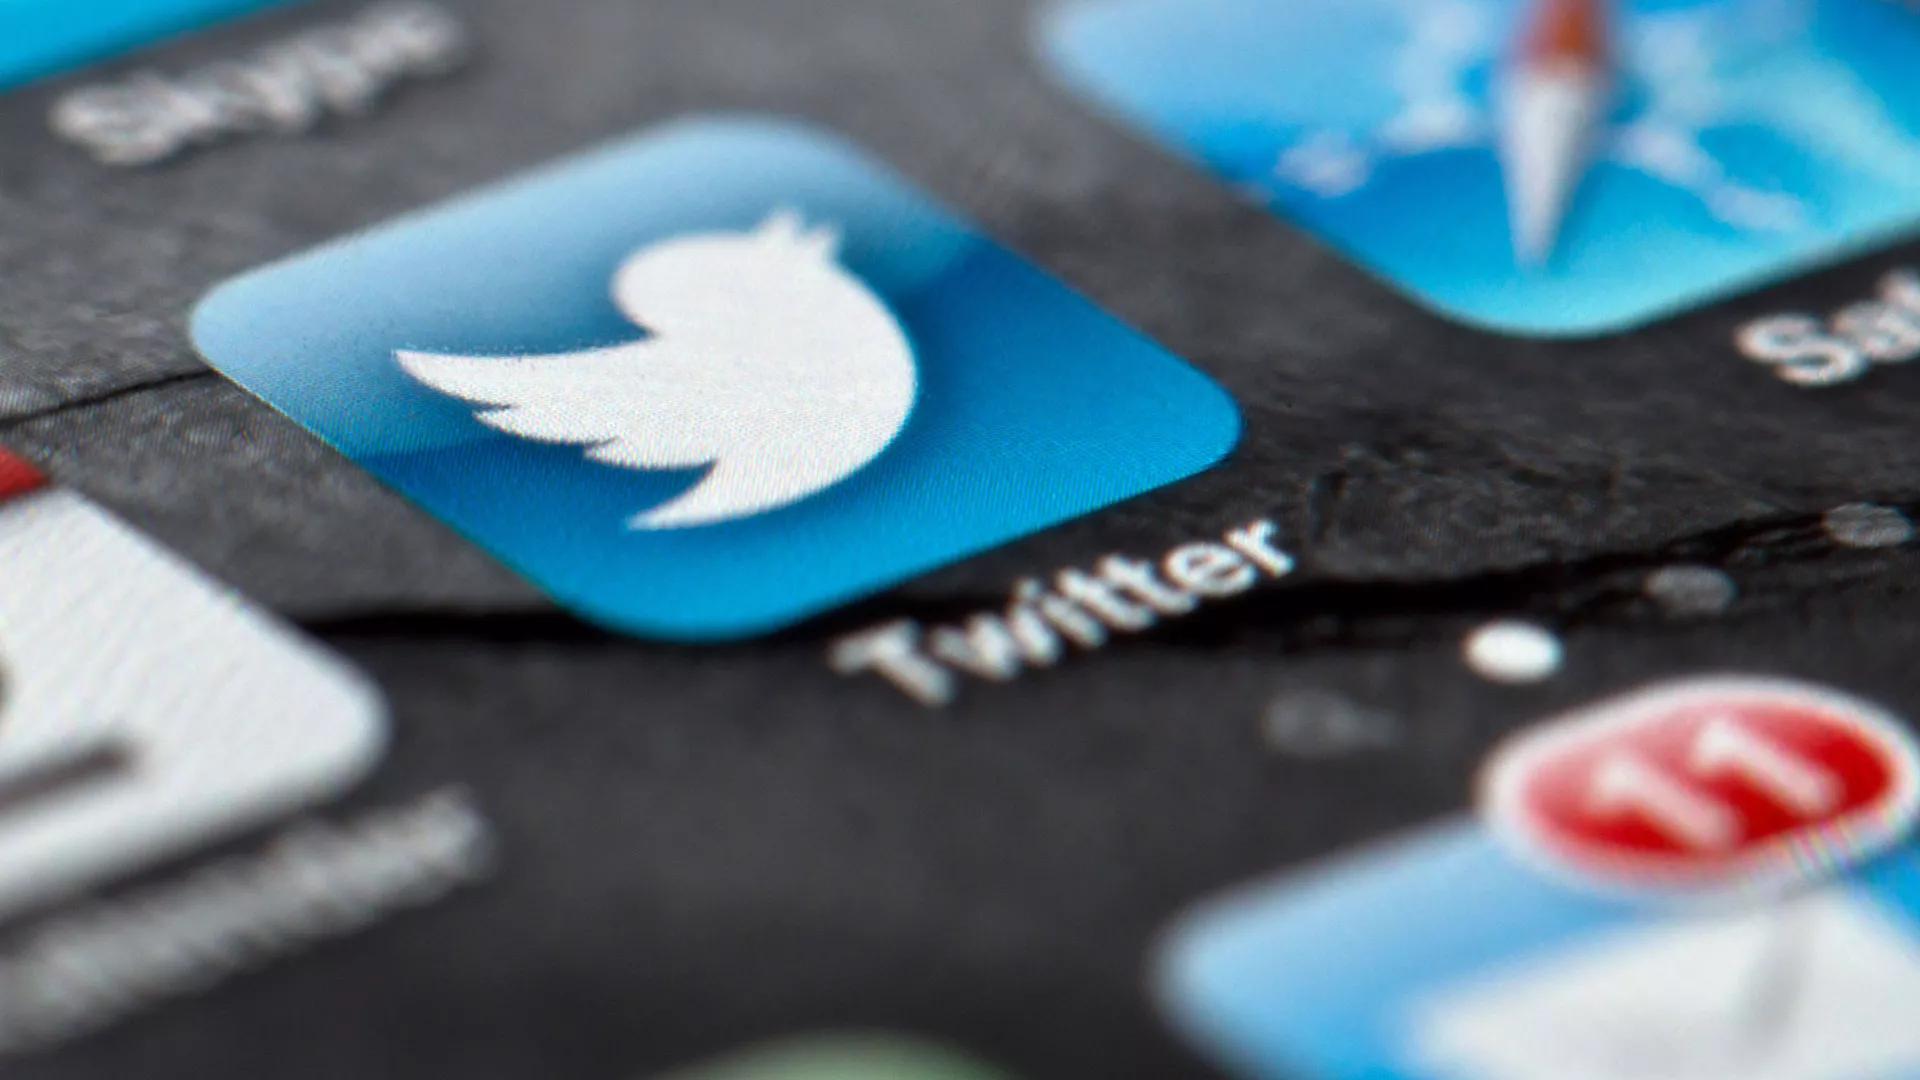 Twitter Announces New 10,000 Maximum for Number of Characters, Text